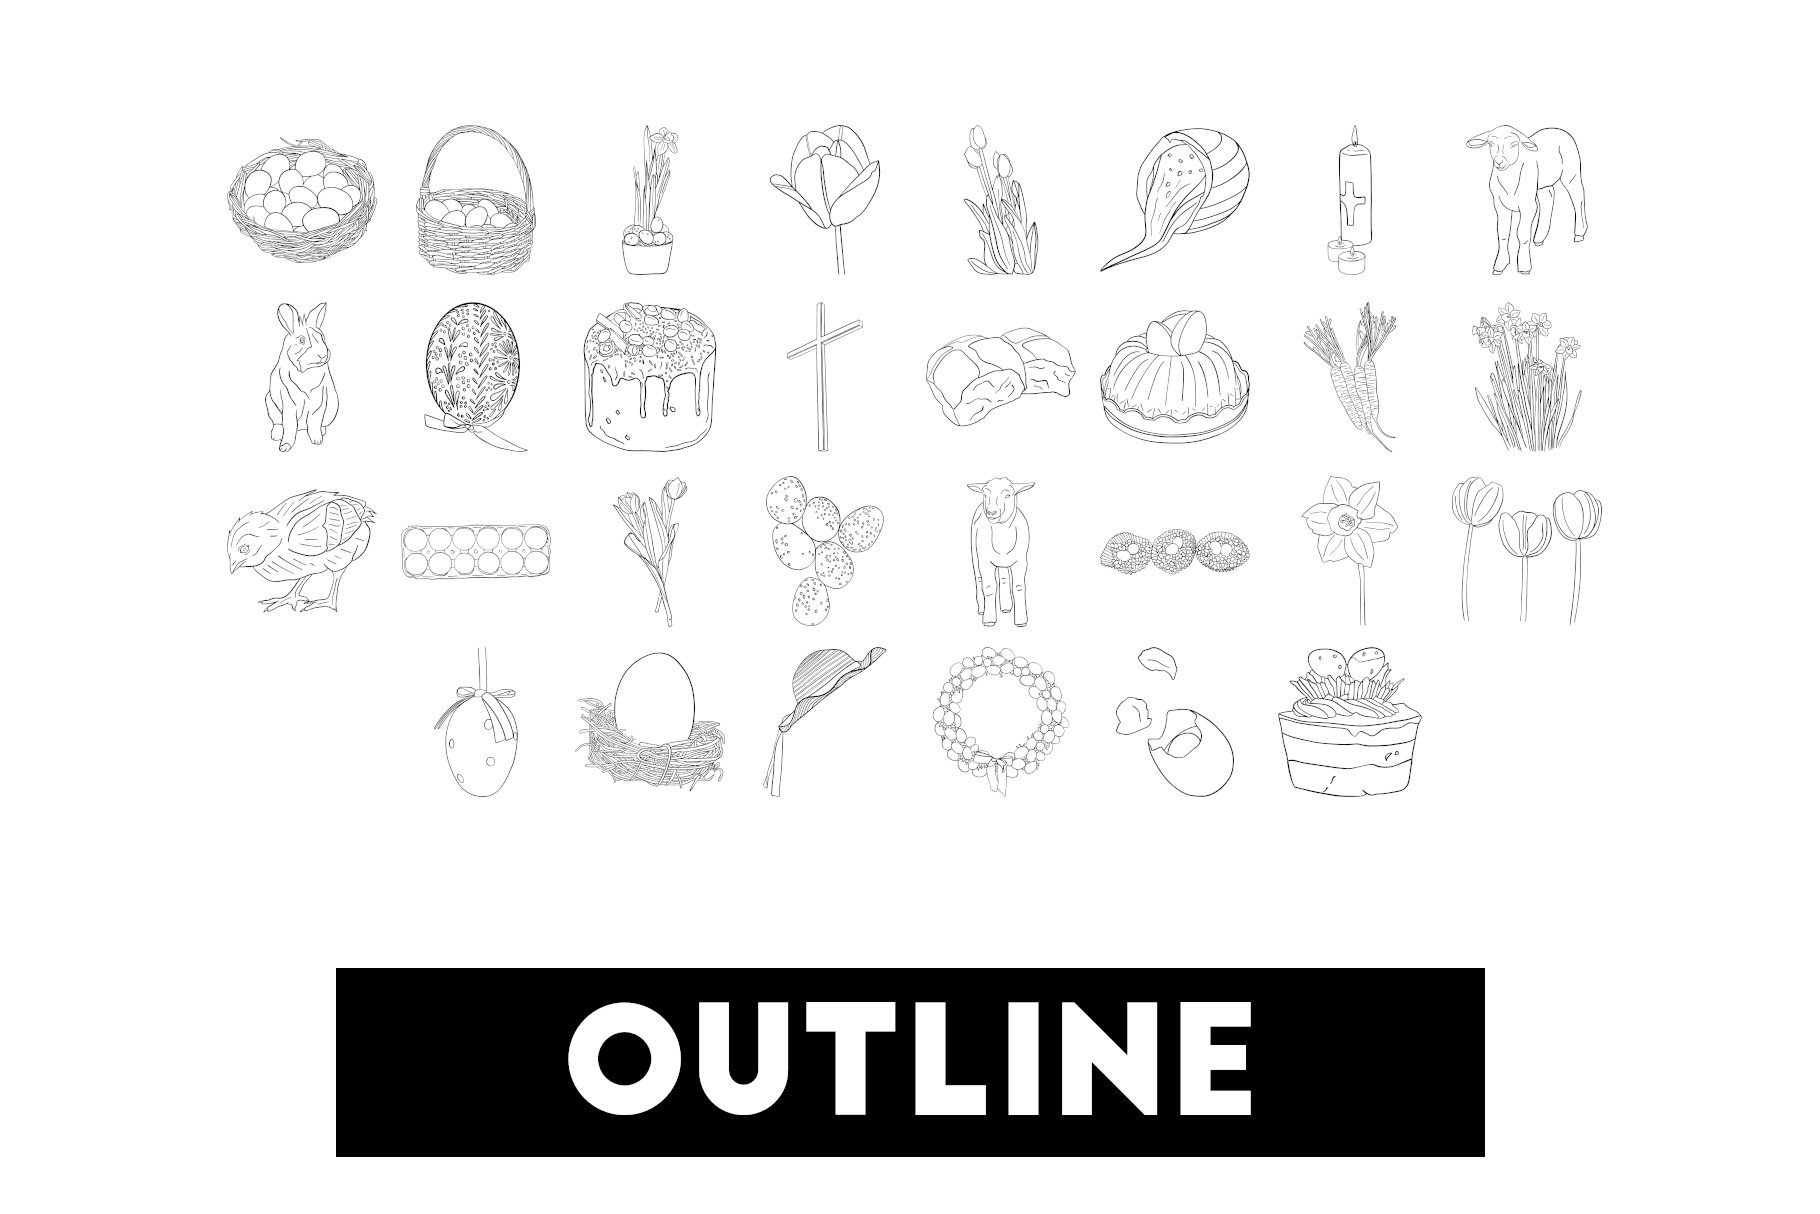 Outline easter collection.